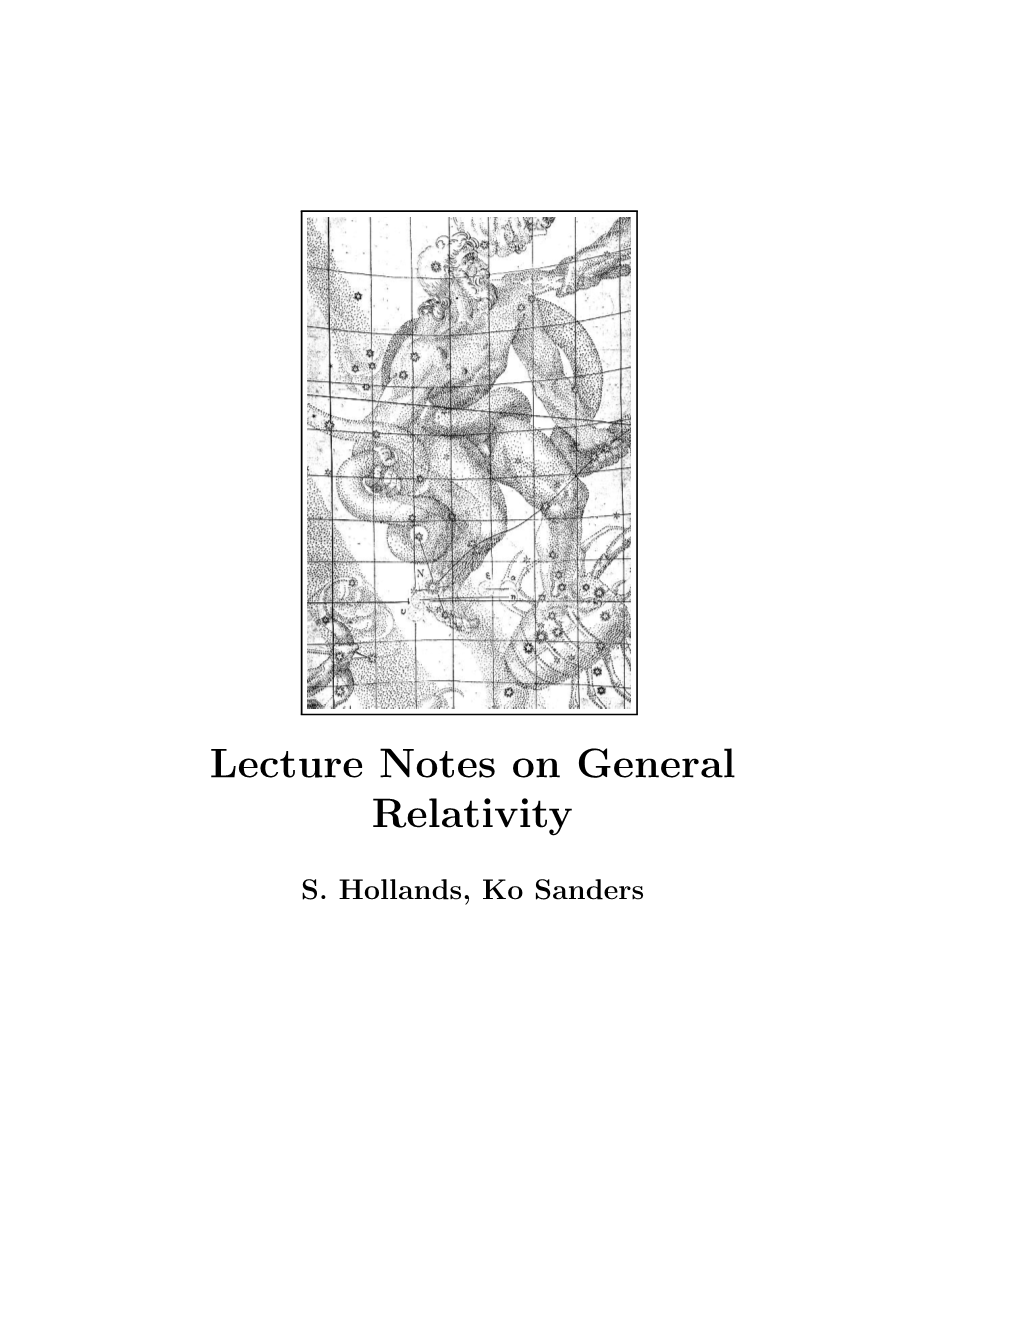 Lecture Notes on General Relativity